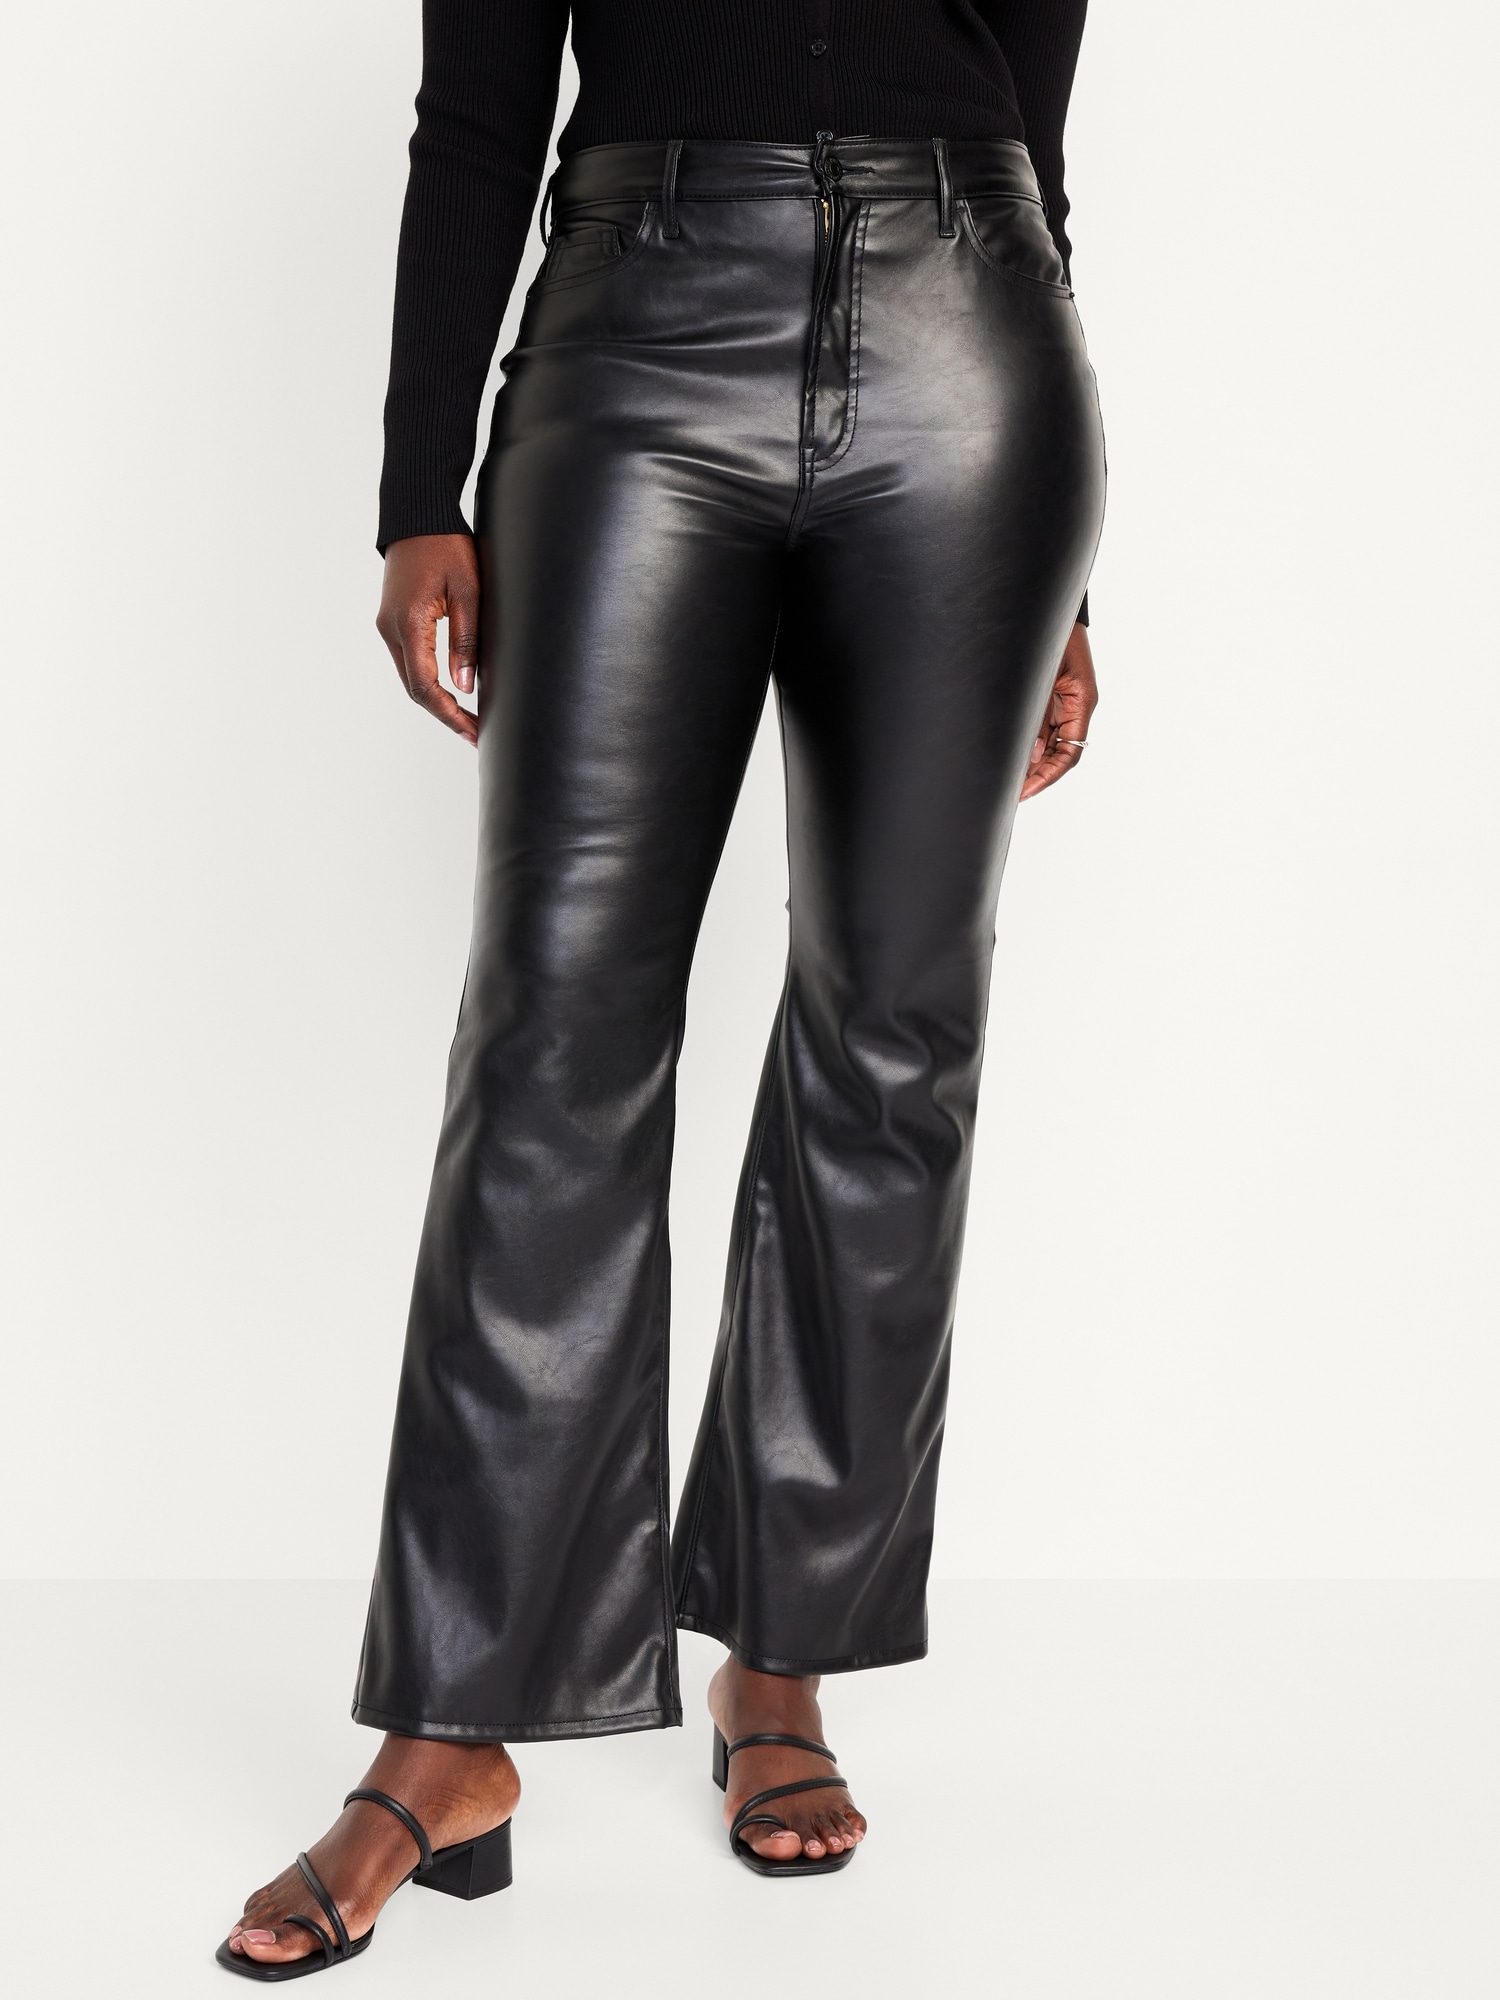 Women Matte Leather Flare Pants High Waist Casual Faux Leather